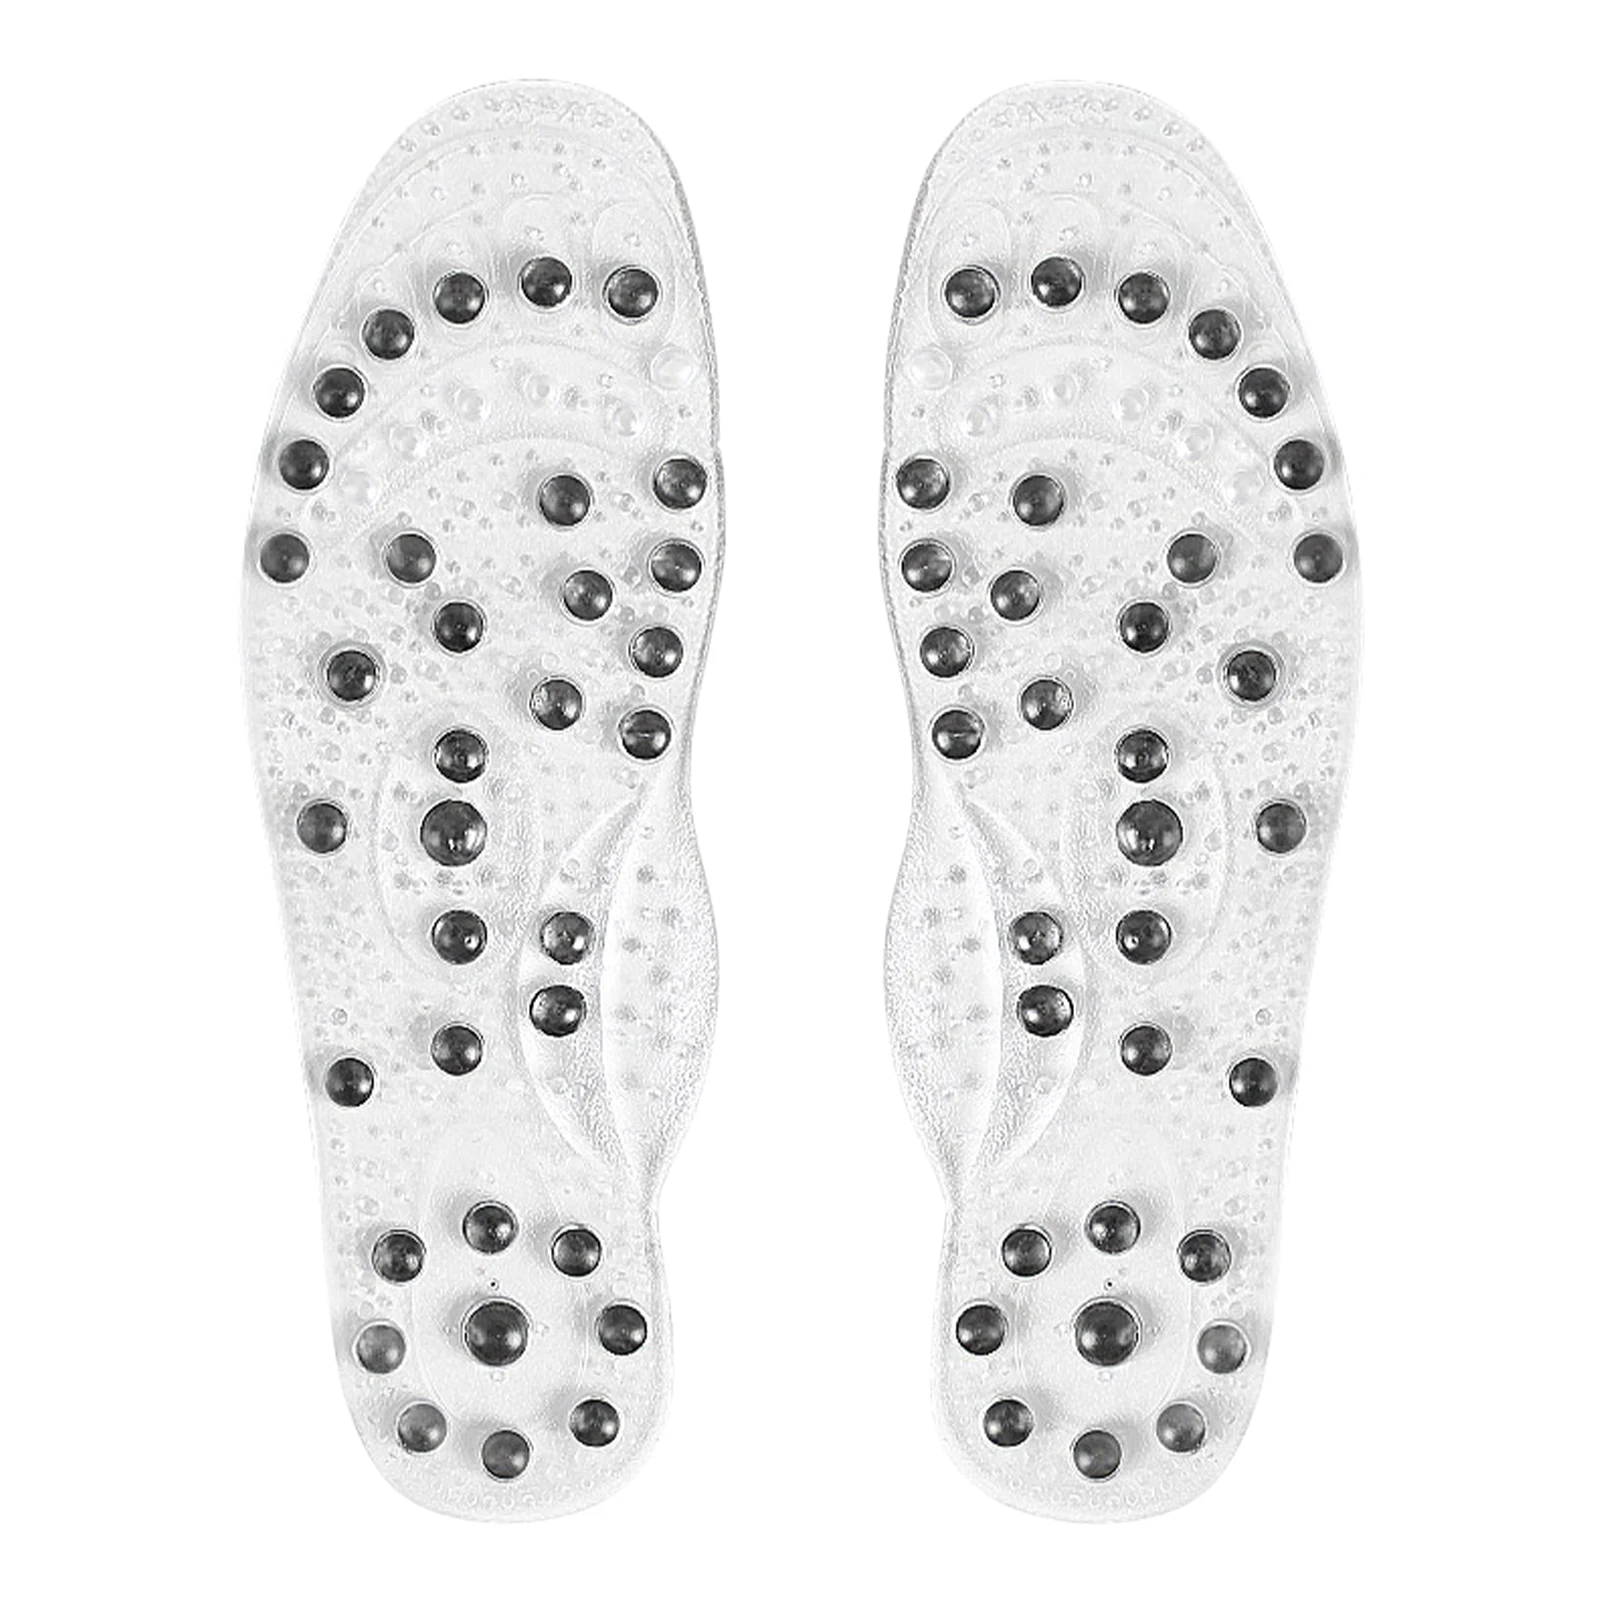 

1pair Arch Support Foot Massage Breathable Shock Proof Sports Comfortable Magnetic Insoles Washable Ergonomic Men Women Cutable